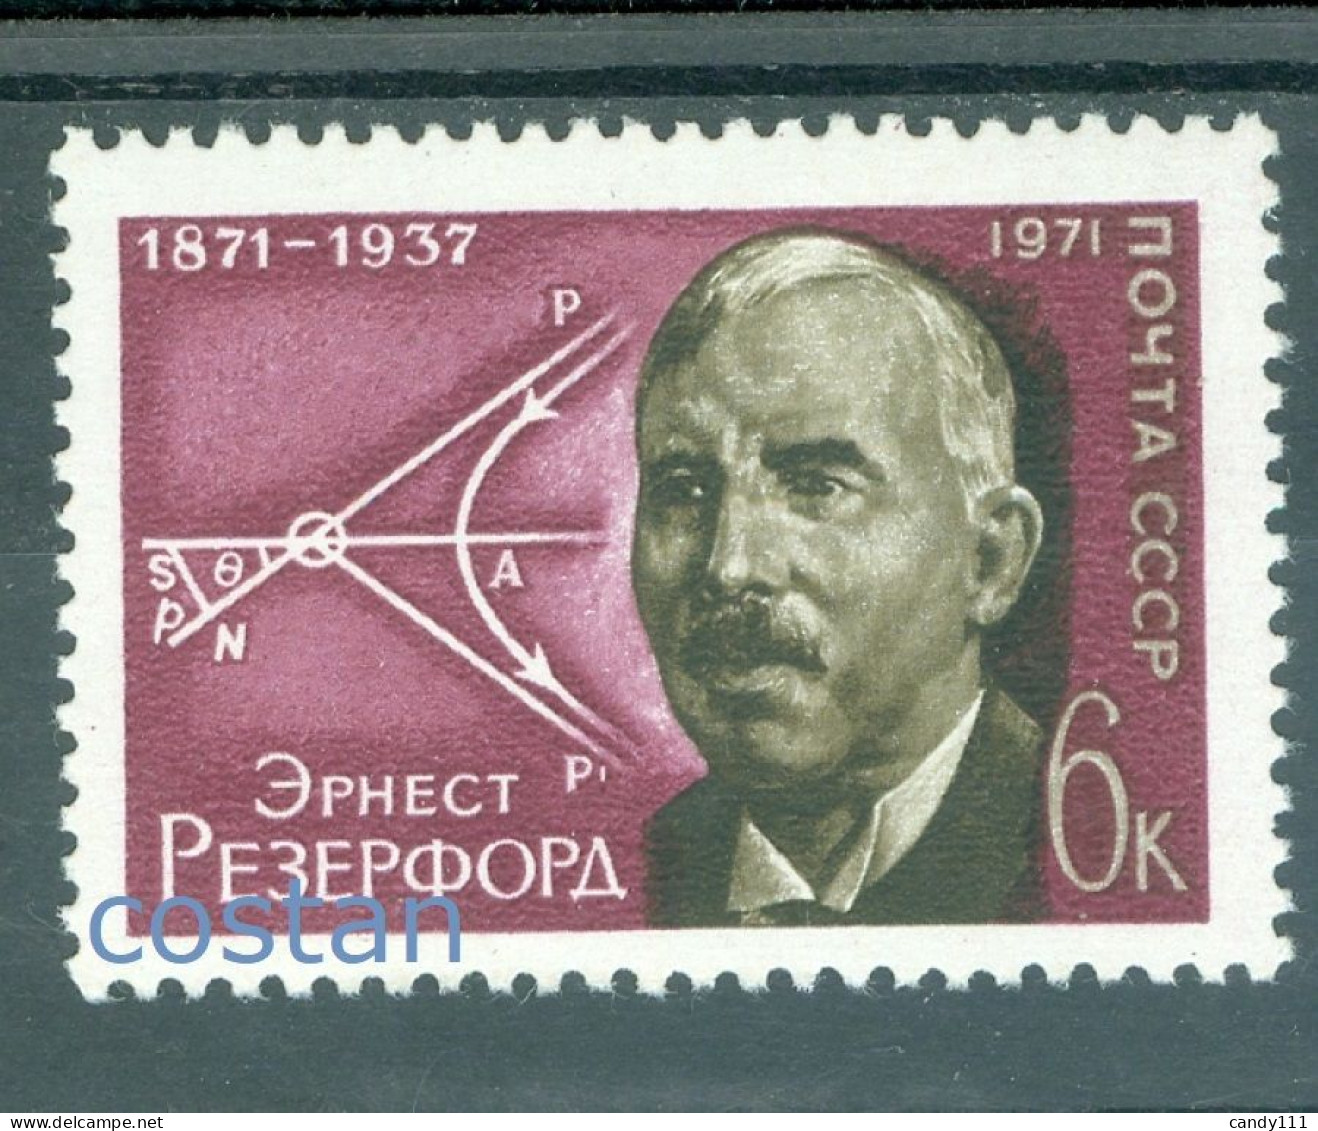 1971 Ernest Rutherford,physicist,Nobel Prize,Nuclear Physics,Russia,3921,MNH - Neufs